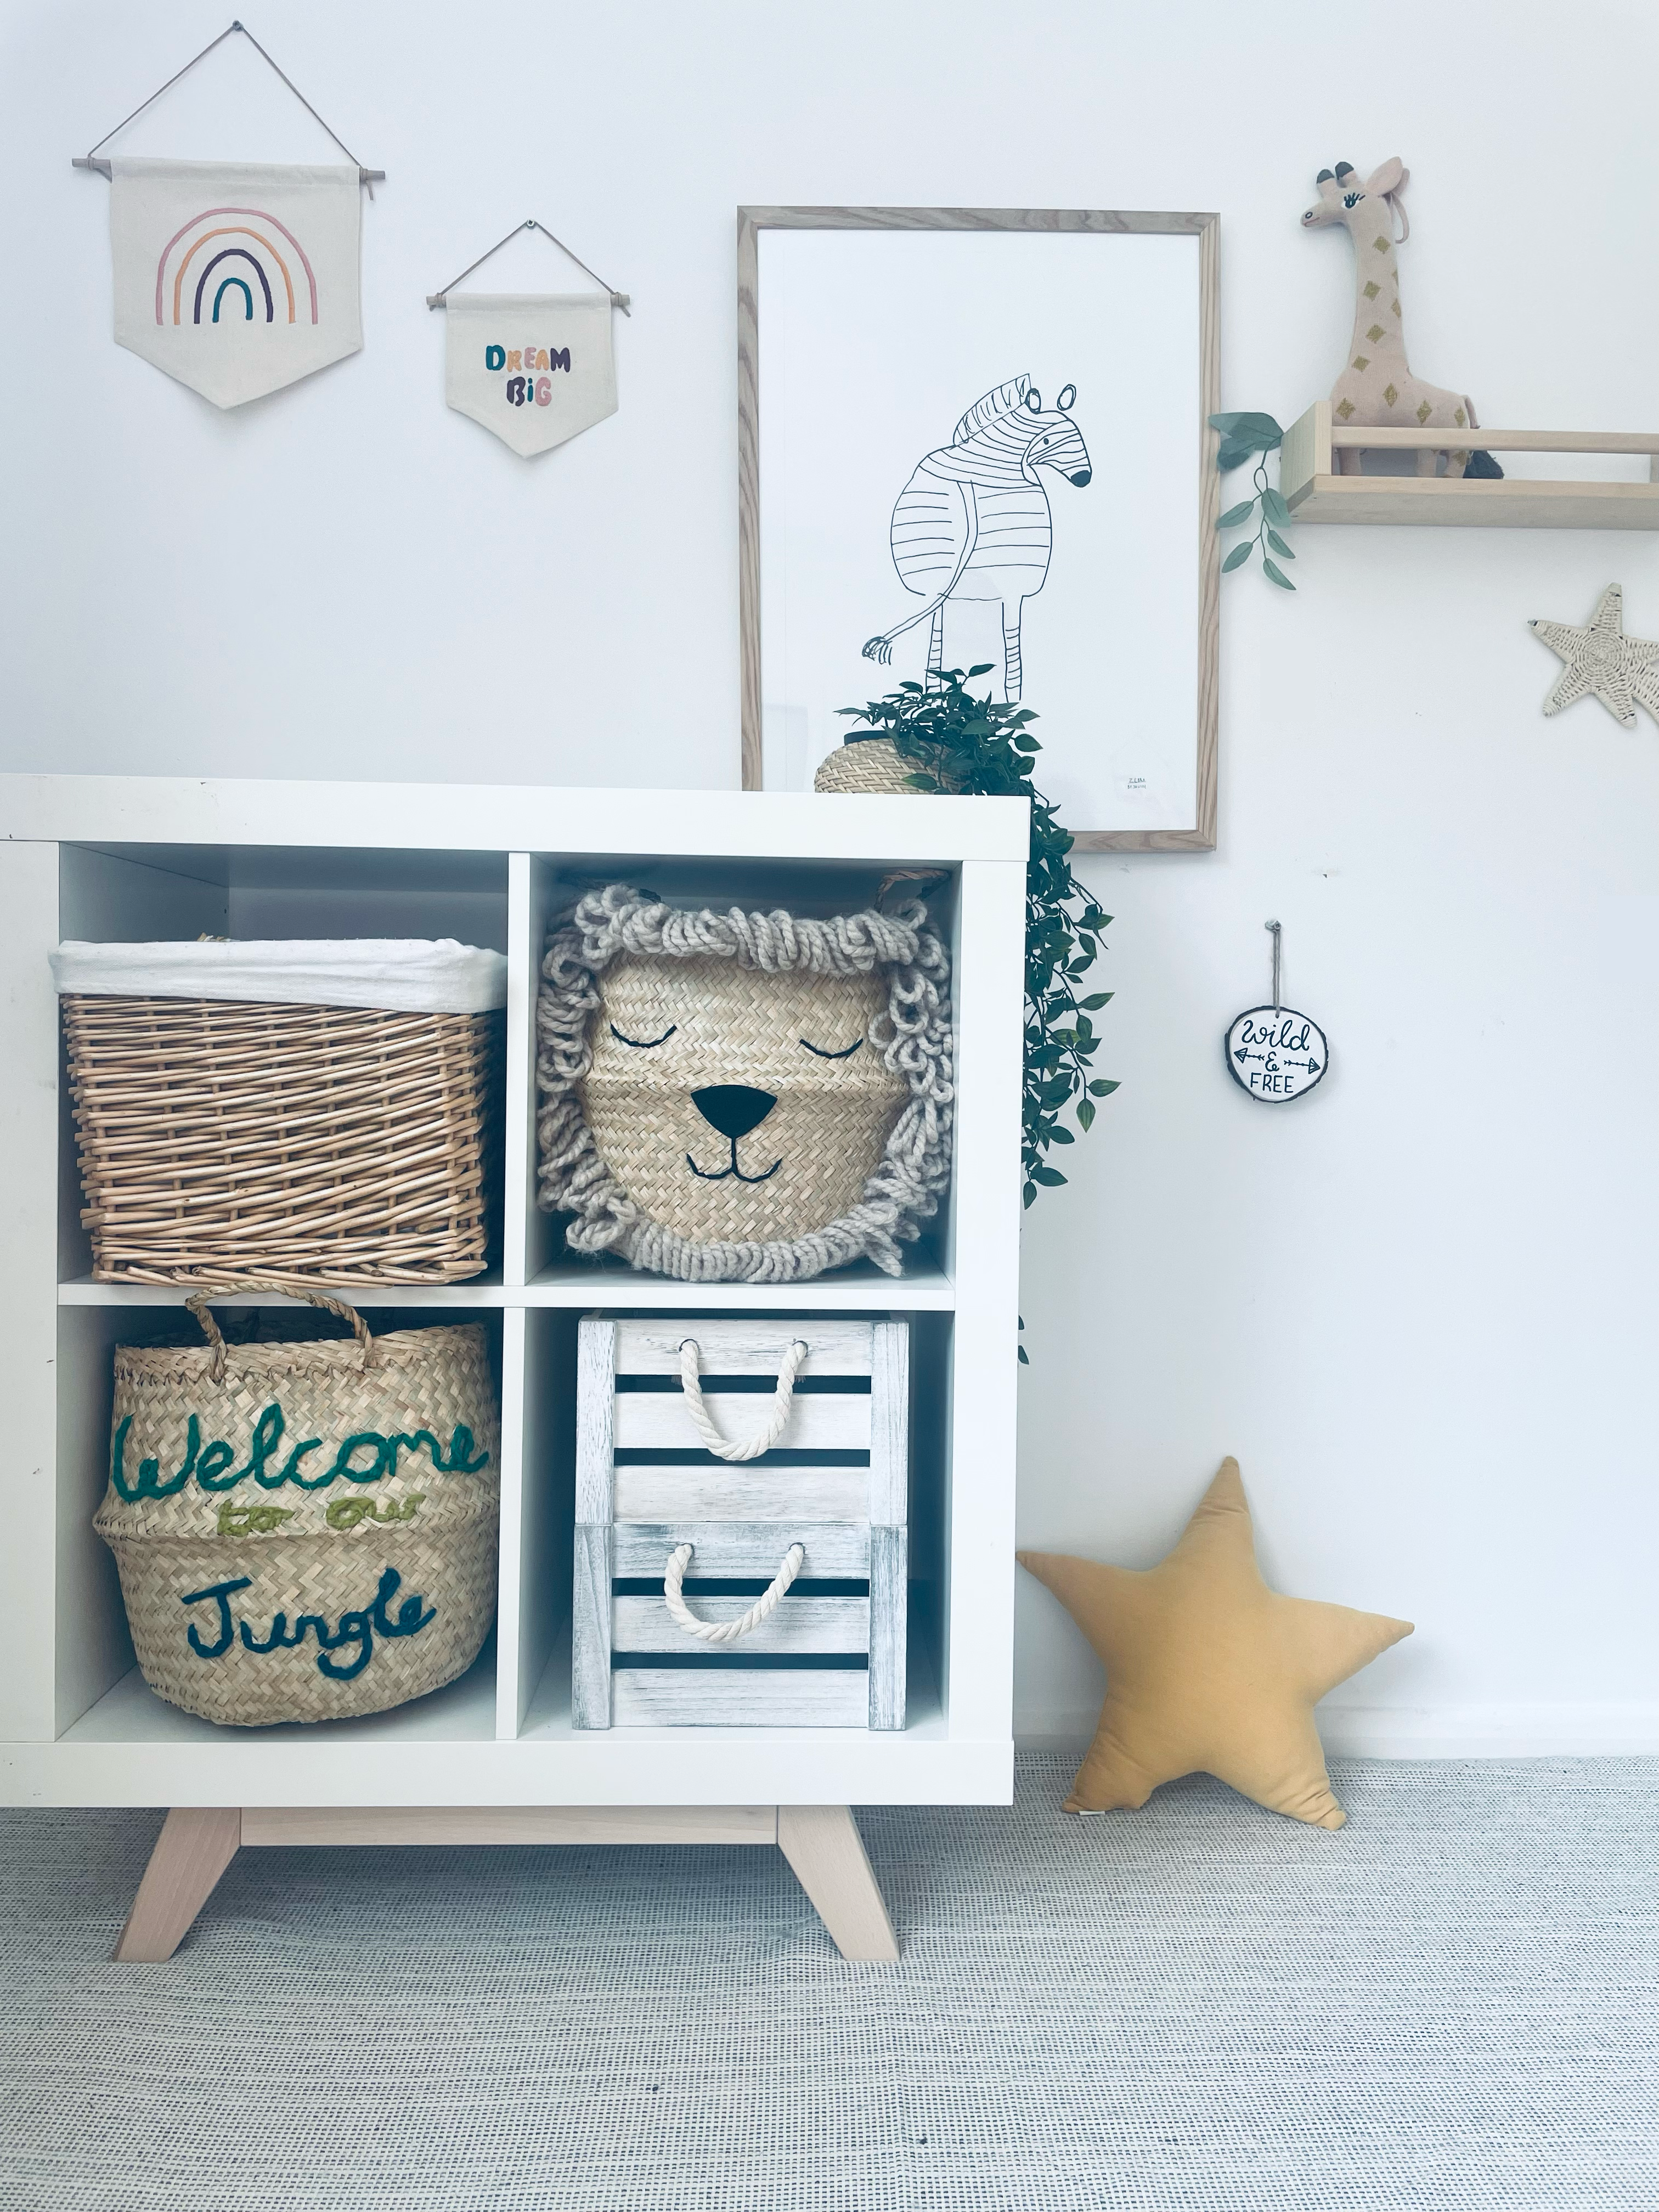 Welcome to our jungle basket - Large